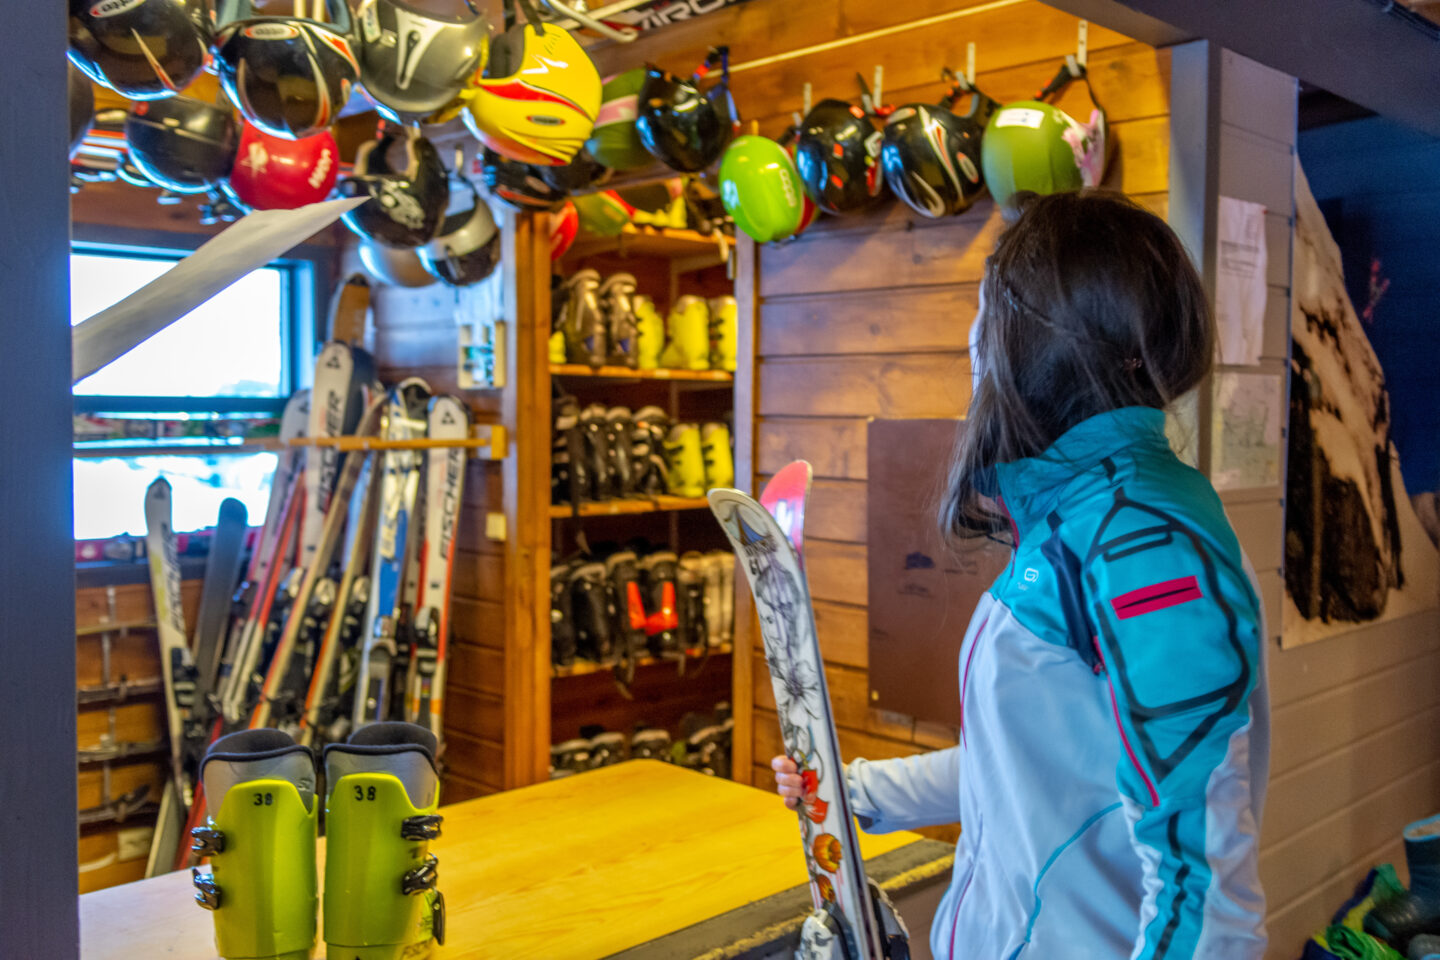 Learning To Ski As An Adult: Top 7 Skiing Tips For Beginners - Arrange Ski Rentals 